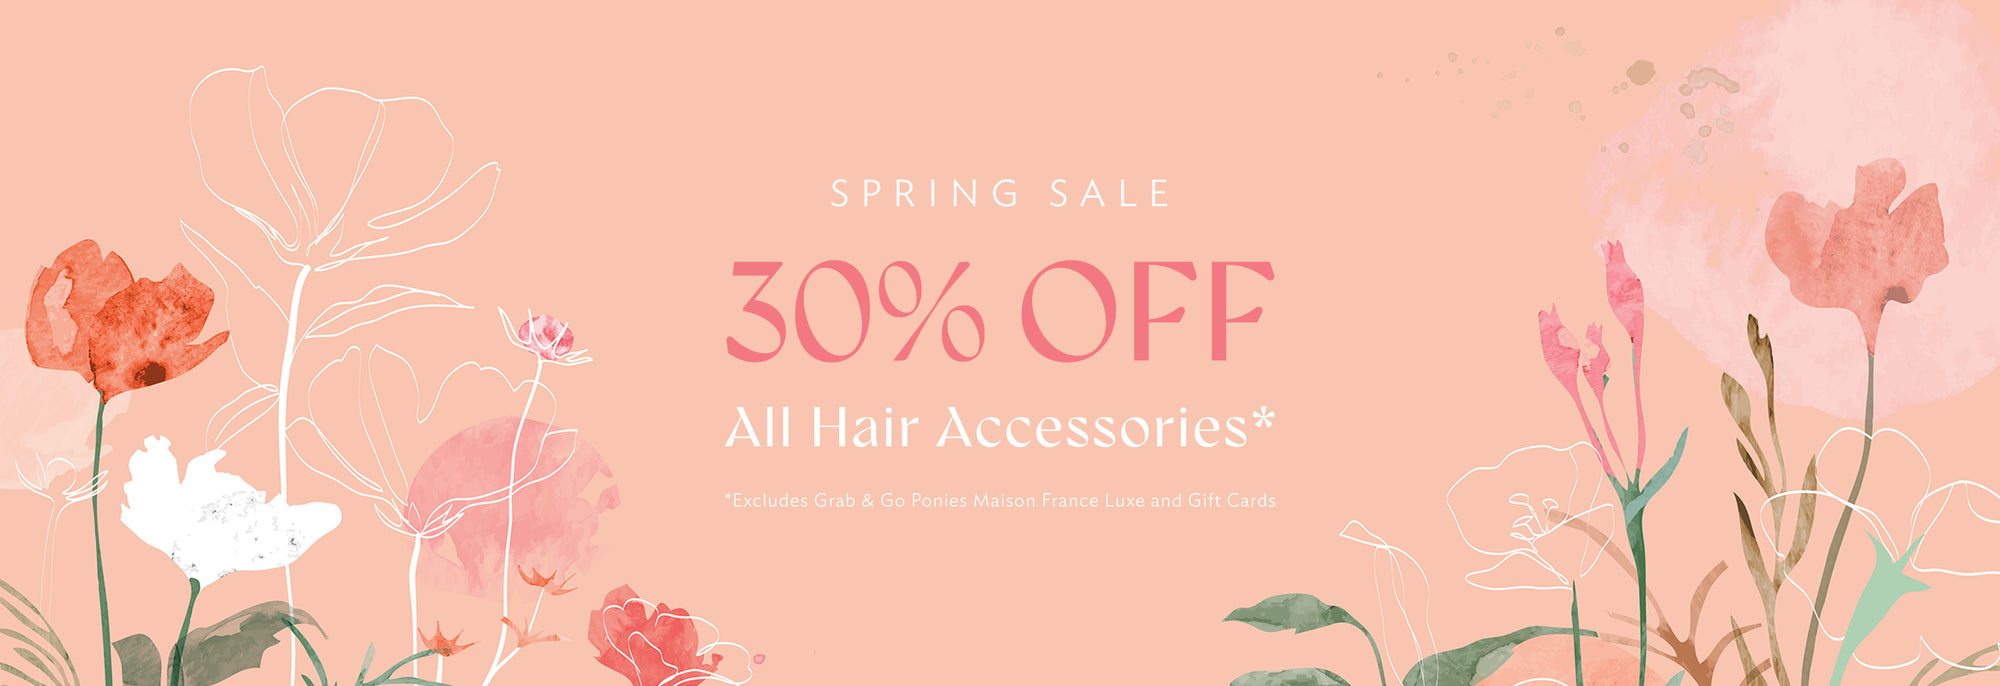 30% off spring sale on hair accessories